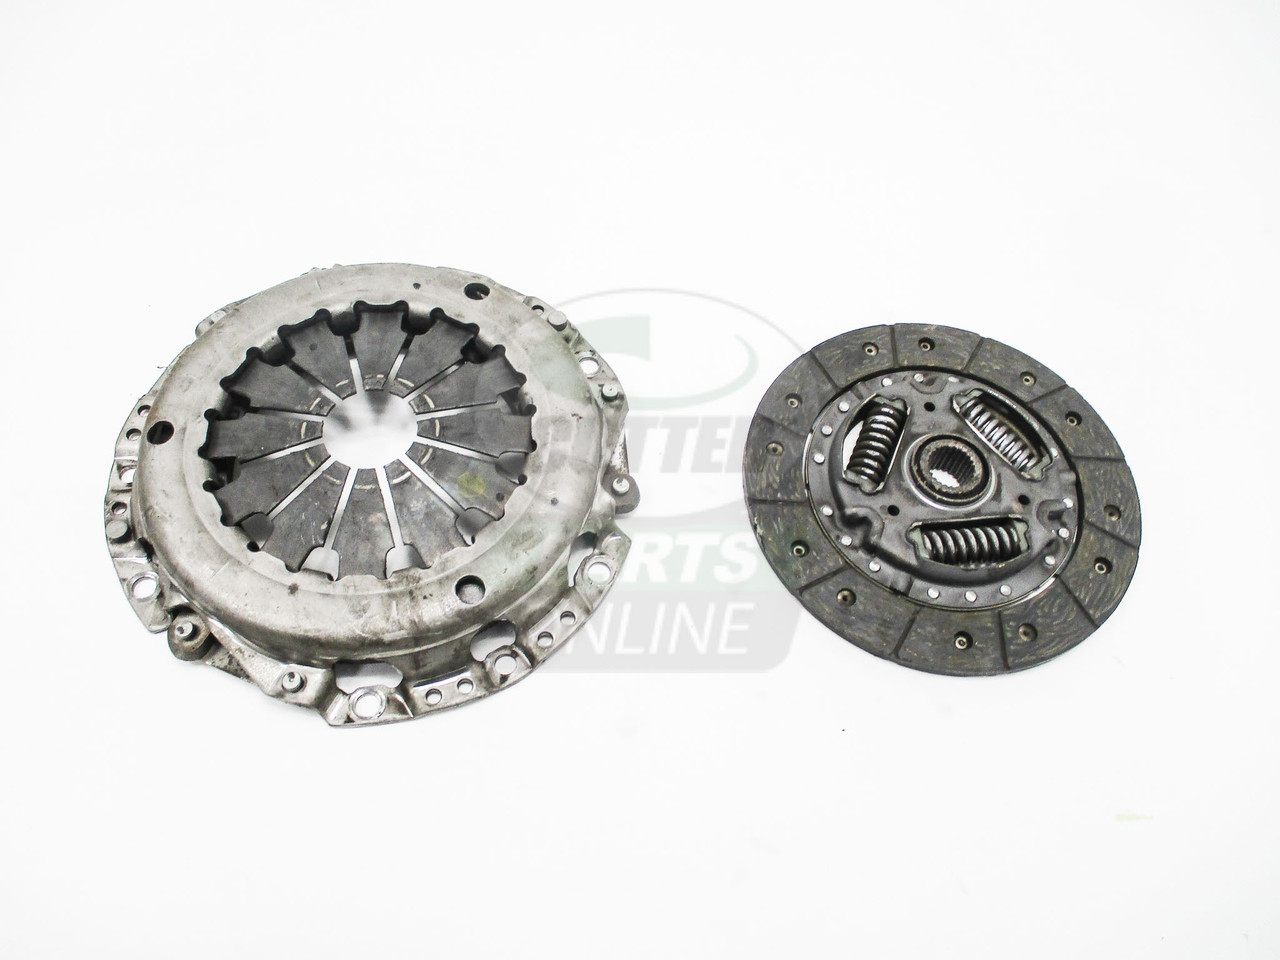 Toro Used Clutch and Cover Kit - 100-2501